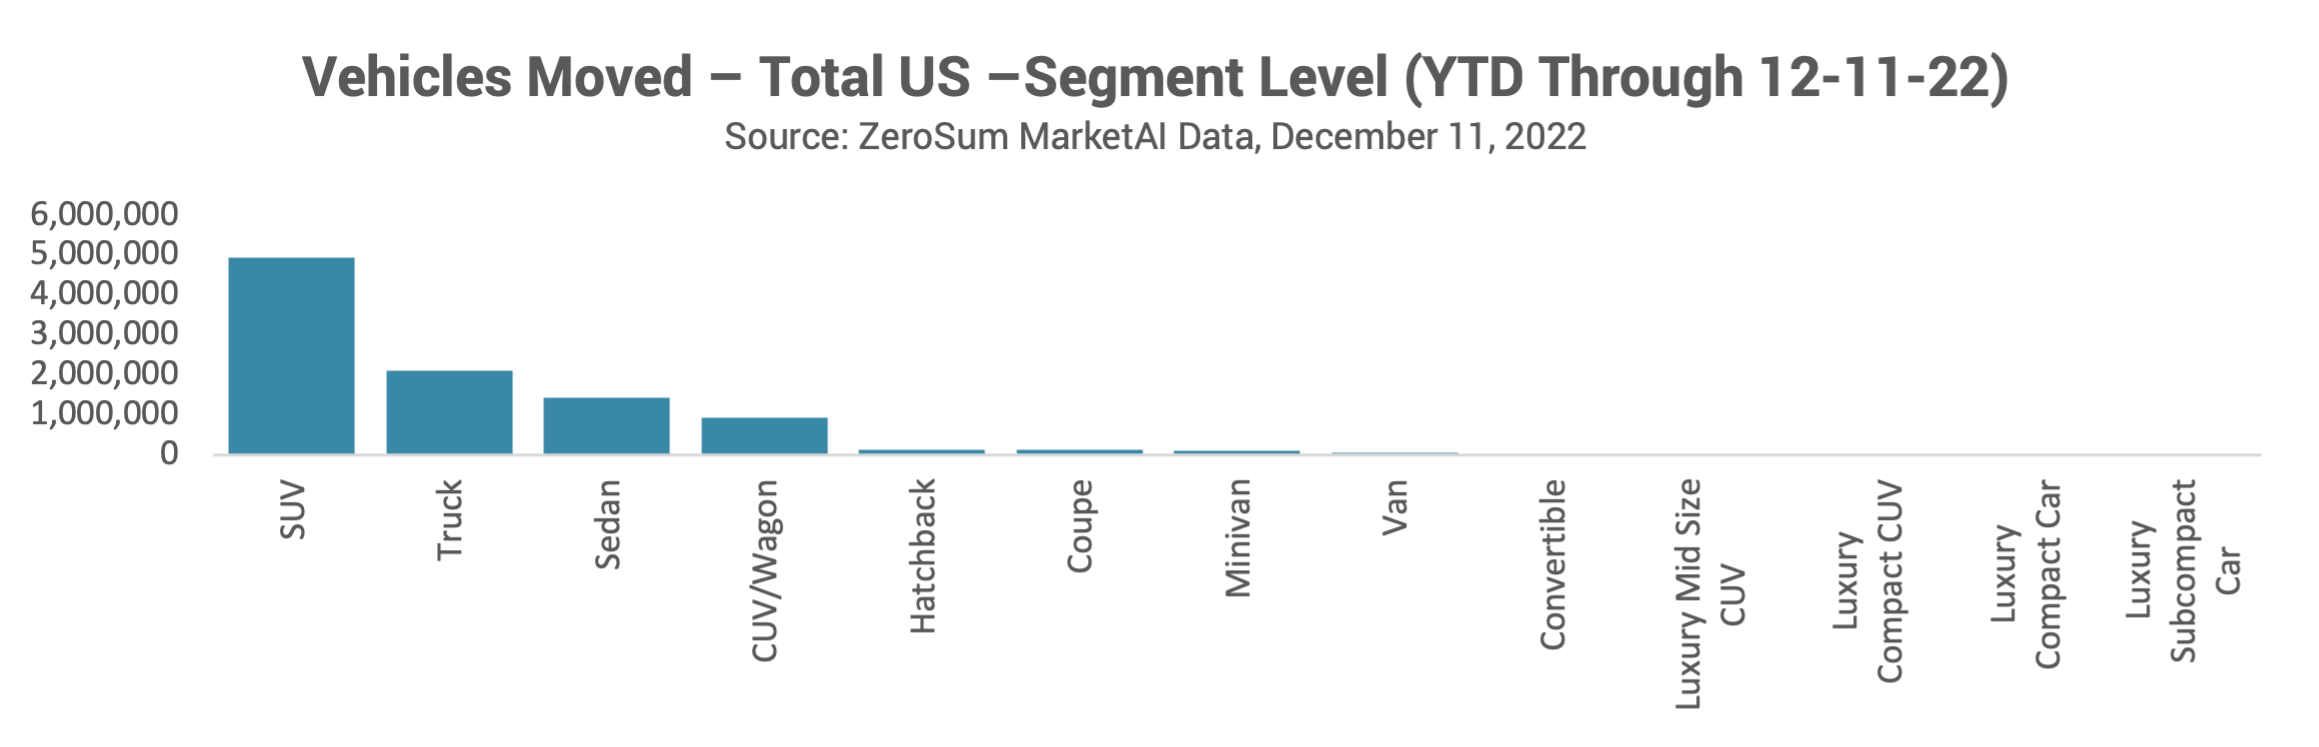 Vehicles Moved Total US Segment Level